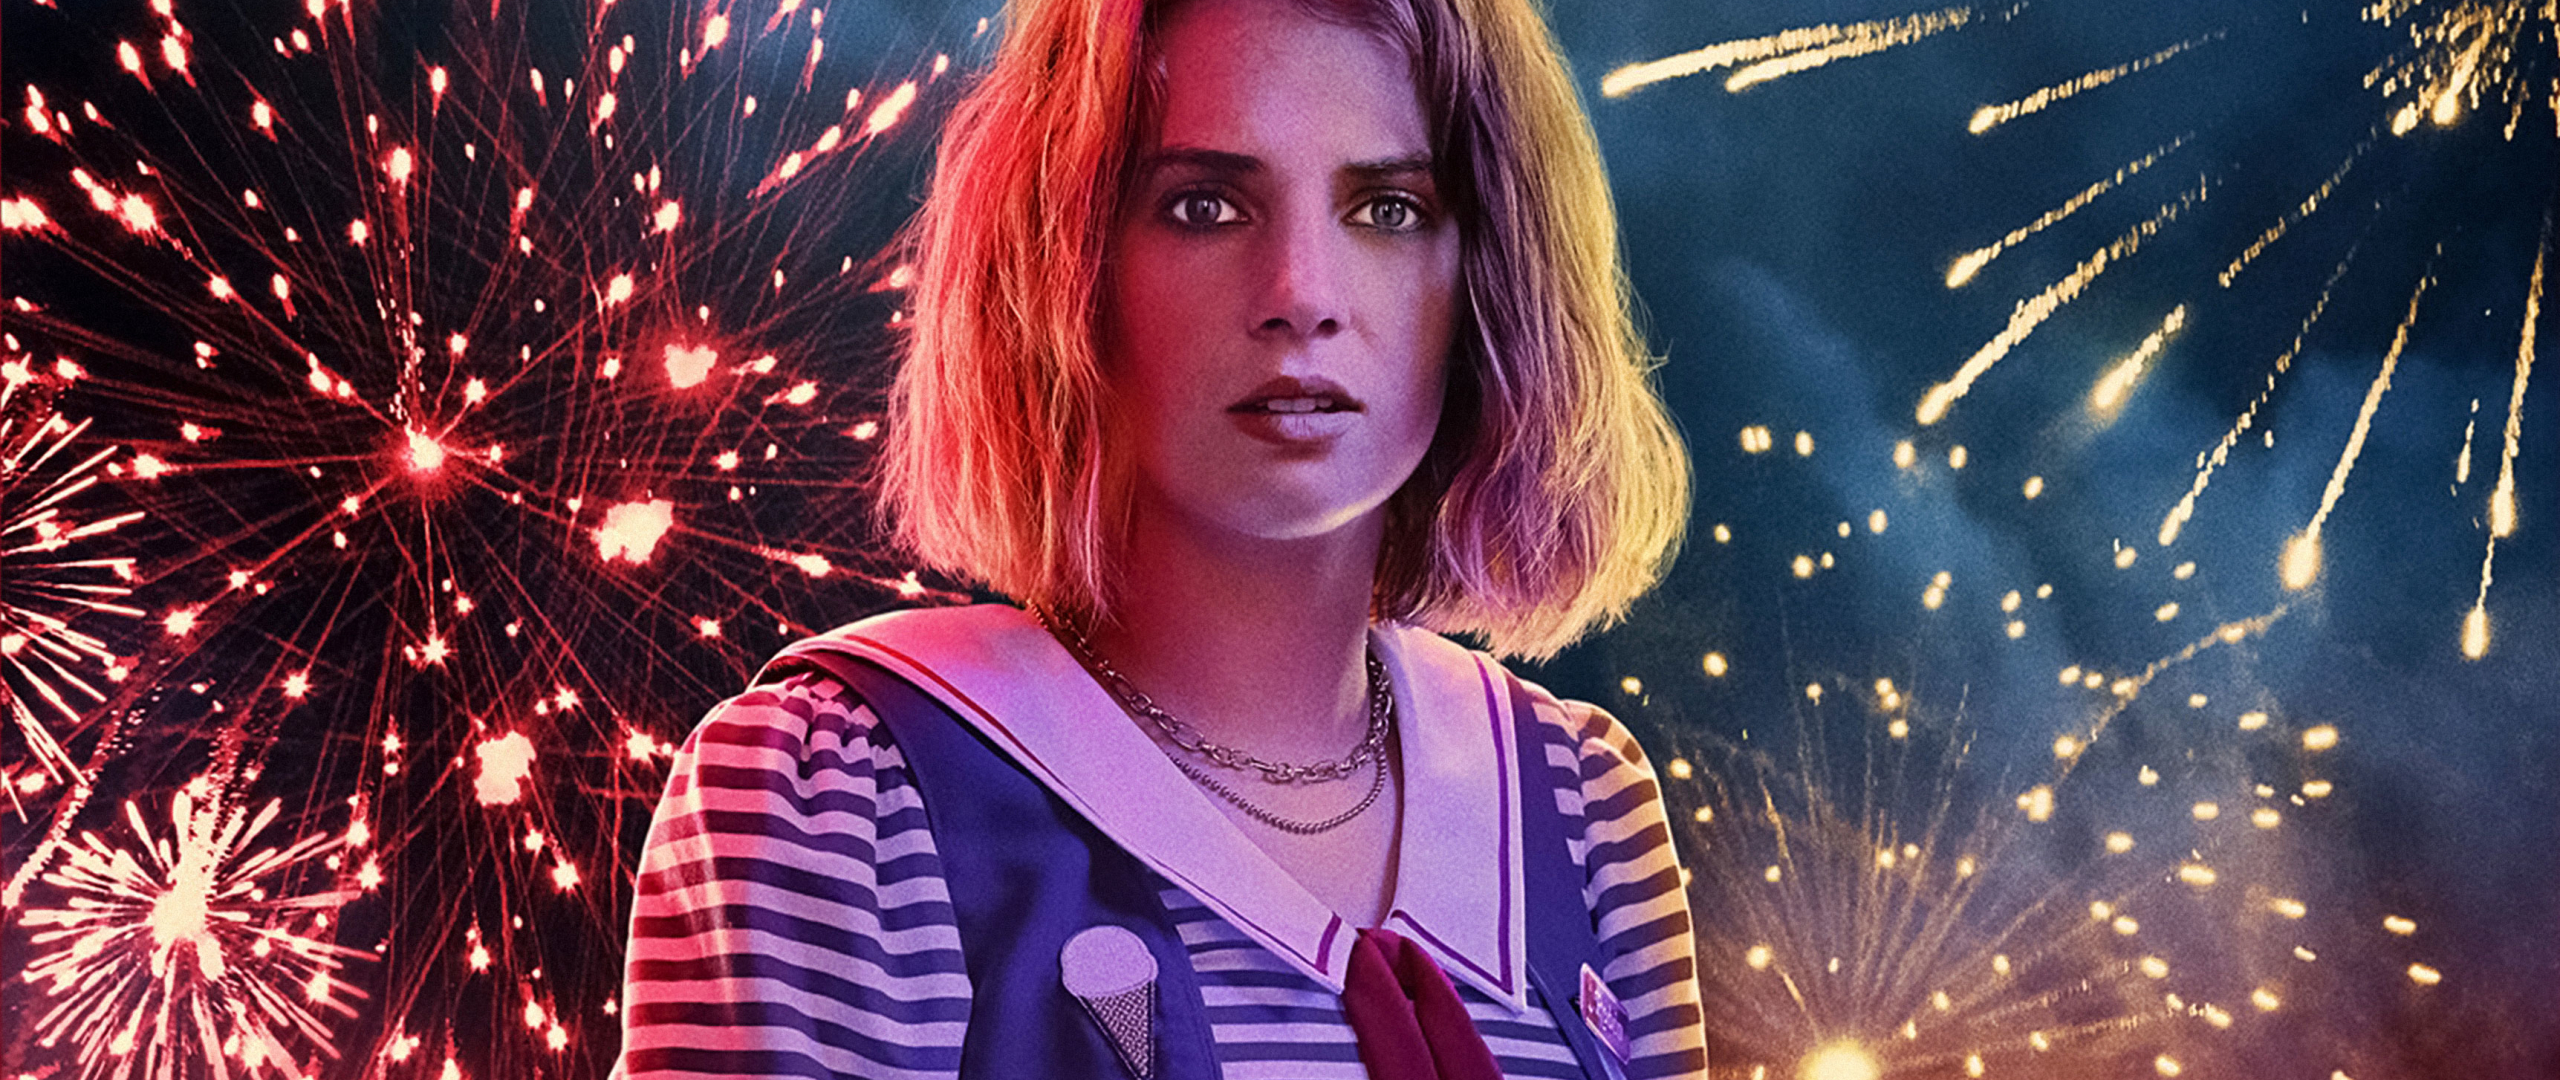 STRANGER THINGS  Rebel Robin Book  Podcast  podcasting Stranger Things  book prequel  Good news dinguses Scoops Ahoy Employee of the Year Robin  Buckley gets an allnew Stranger Things Prequel